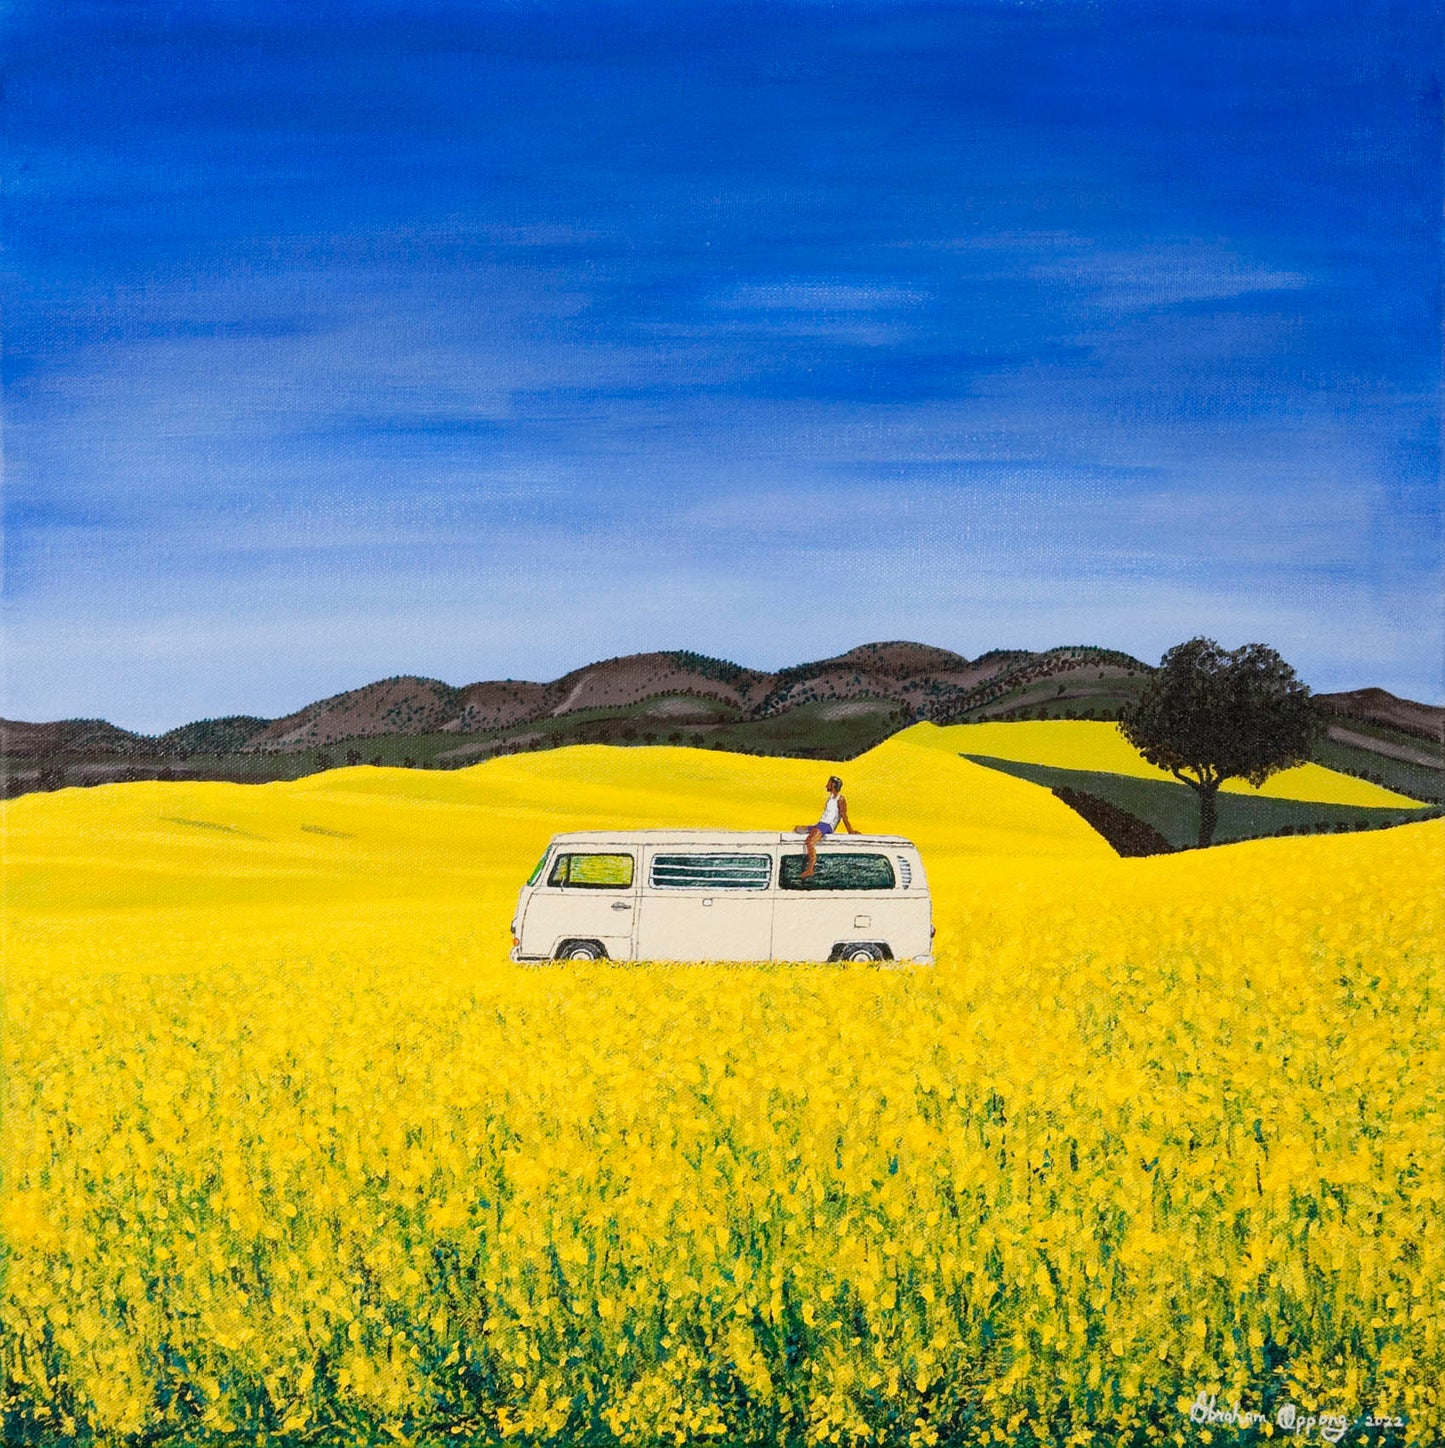 Original painting of a man sitting on the roof of a white campervan on a sunny day of blue skies in yellow flower field landscape with trees and hills in the background.